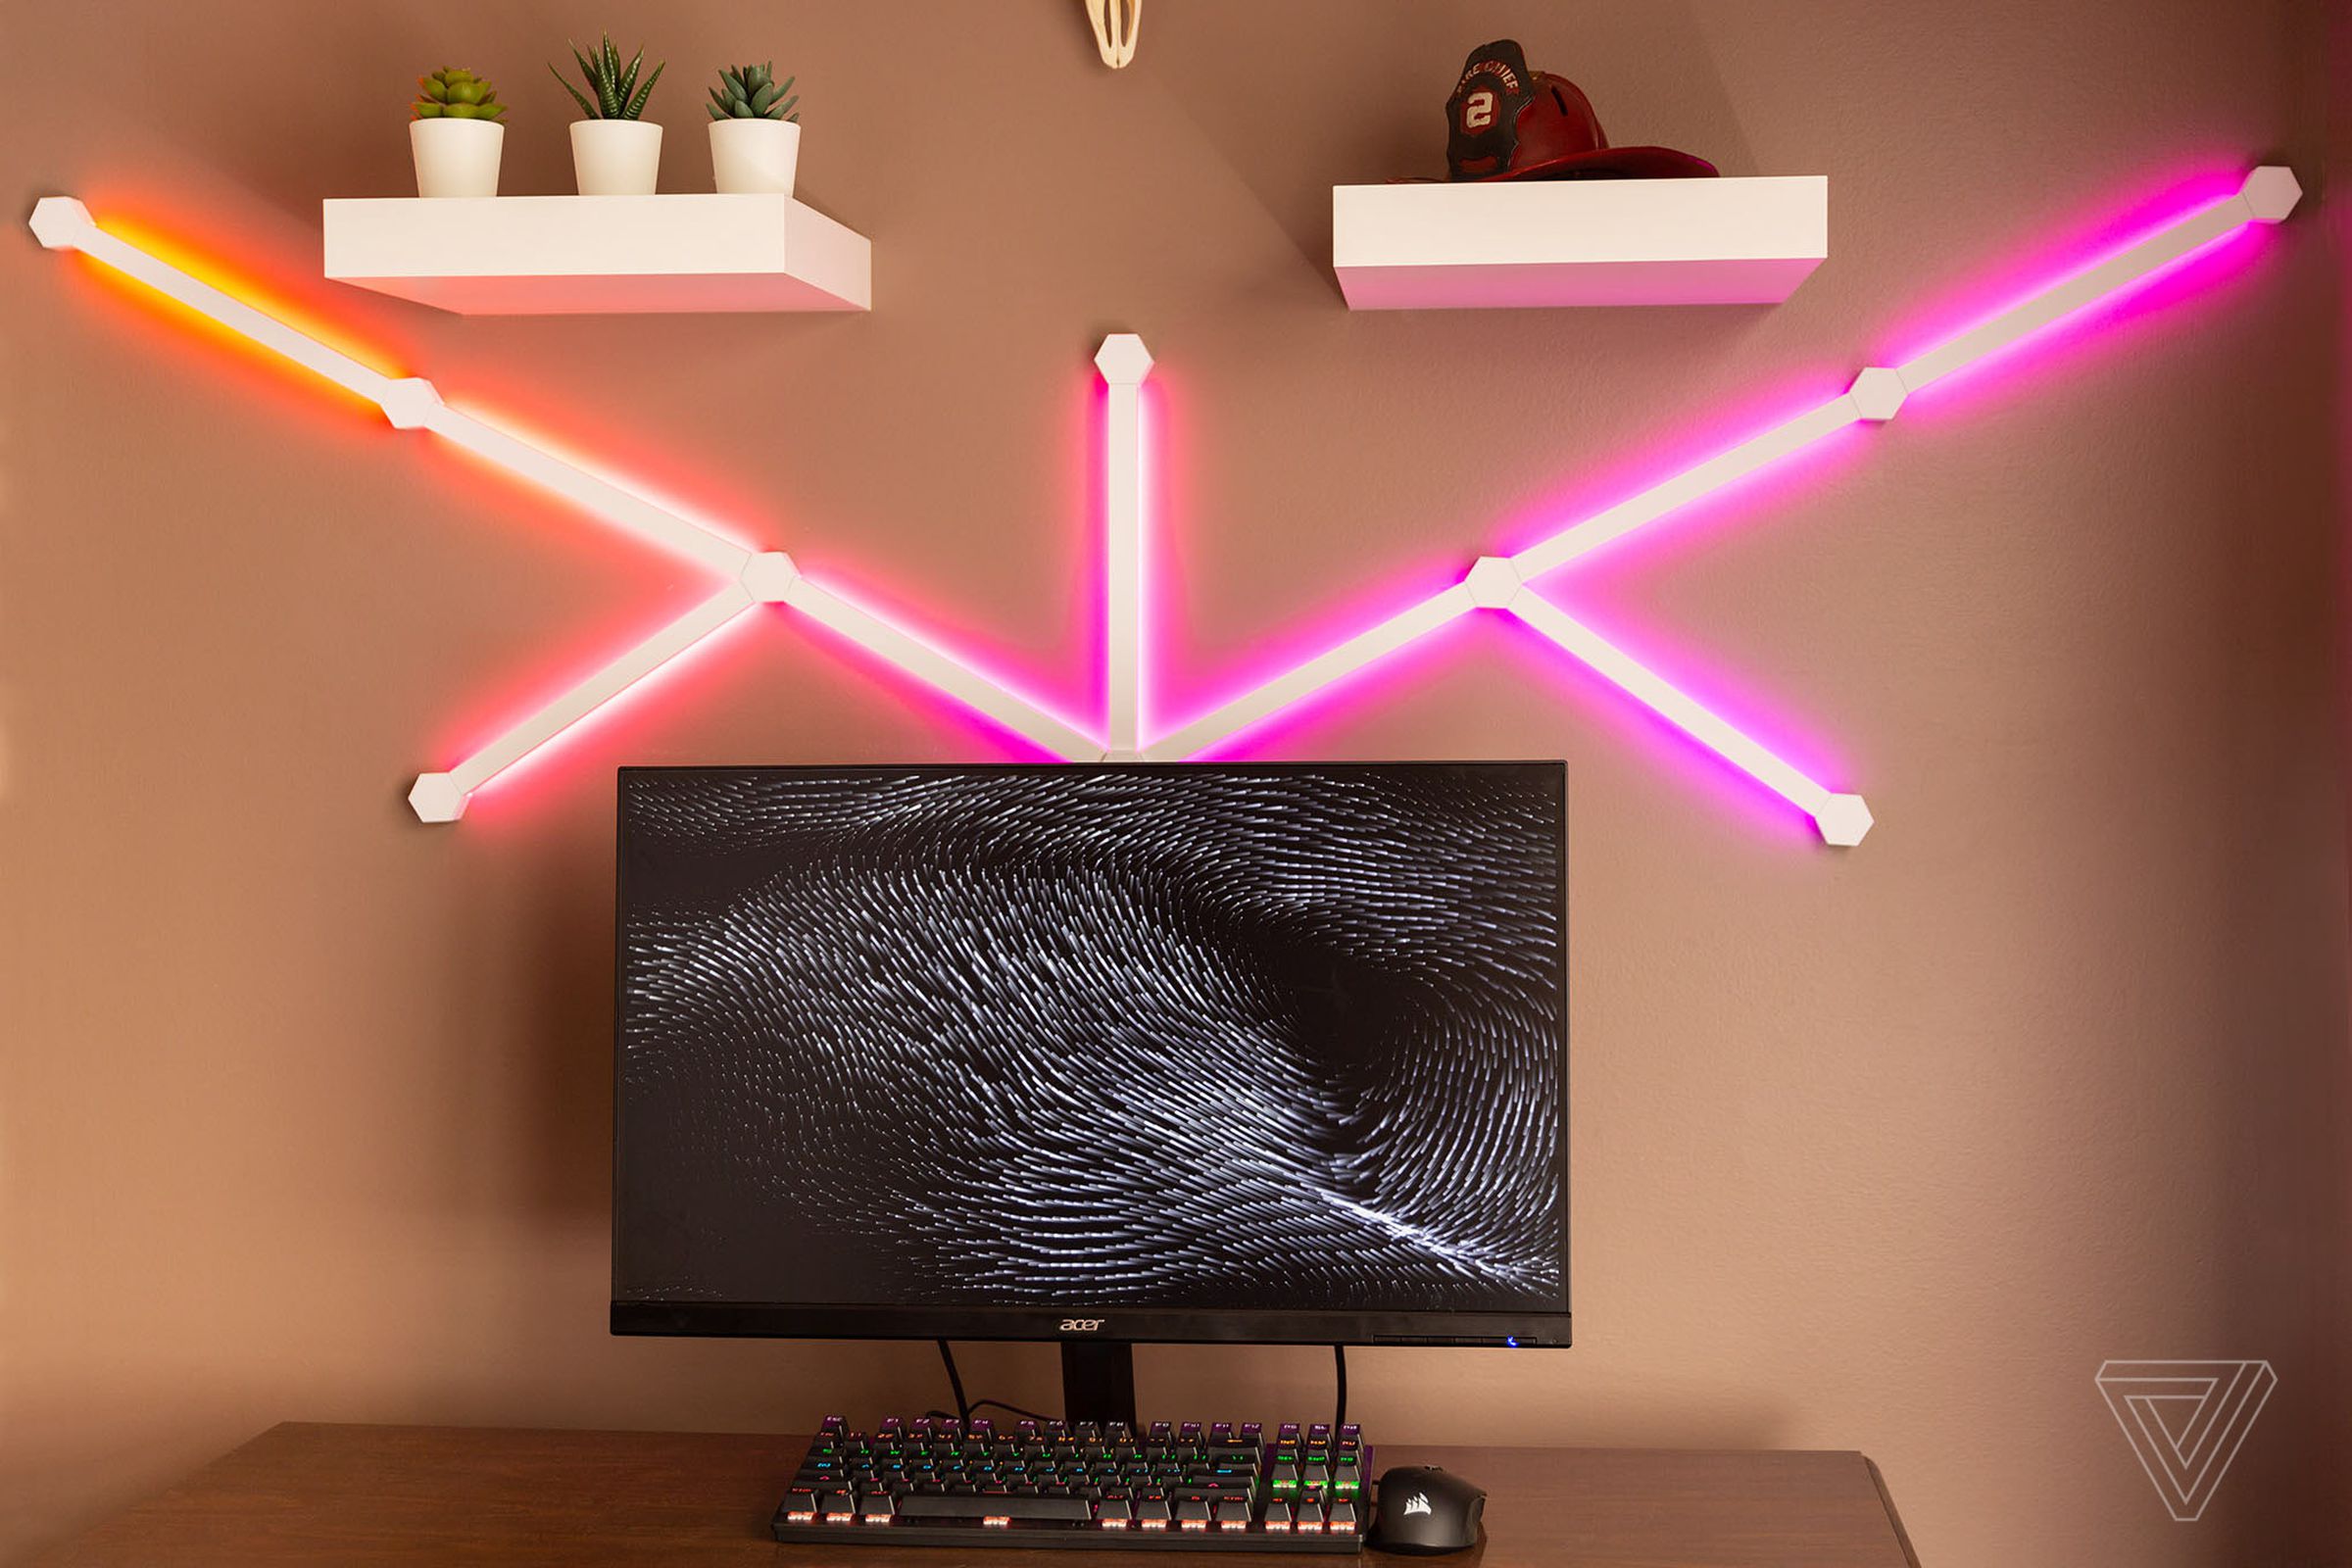 You can go full gamer with the Nanoleaf Lines or just use them as some unique accent lighting.